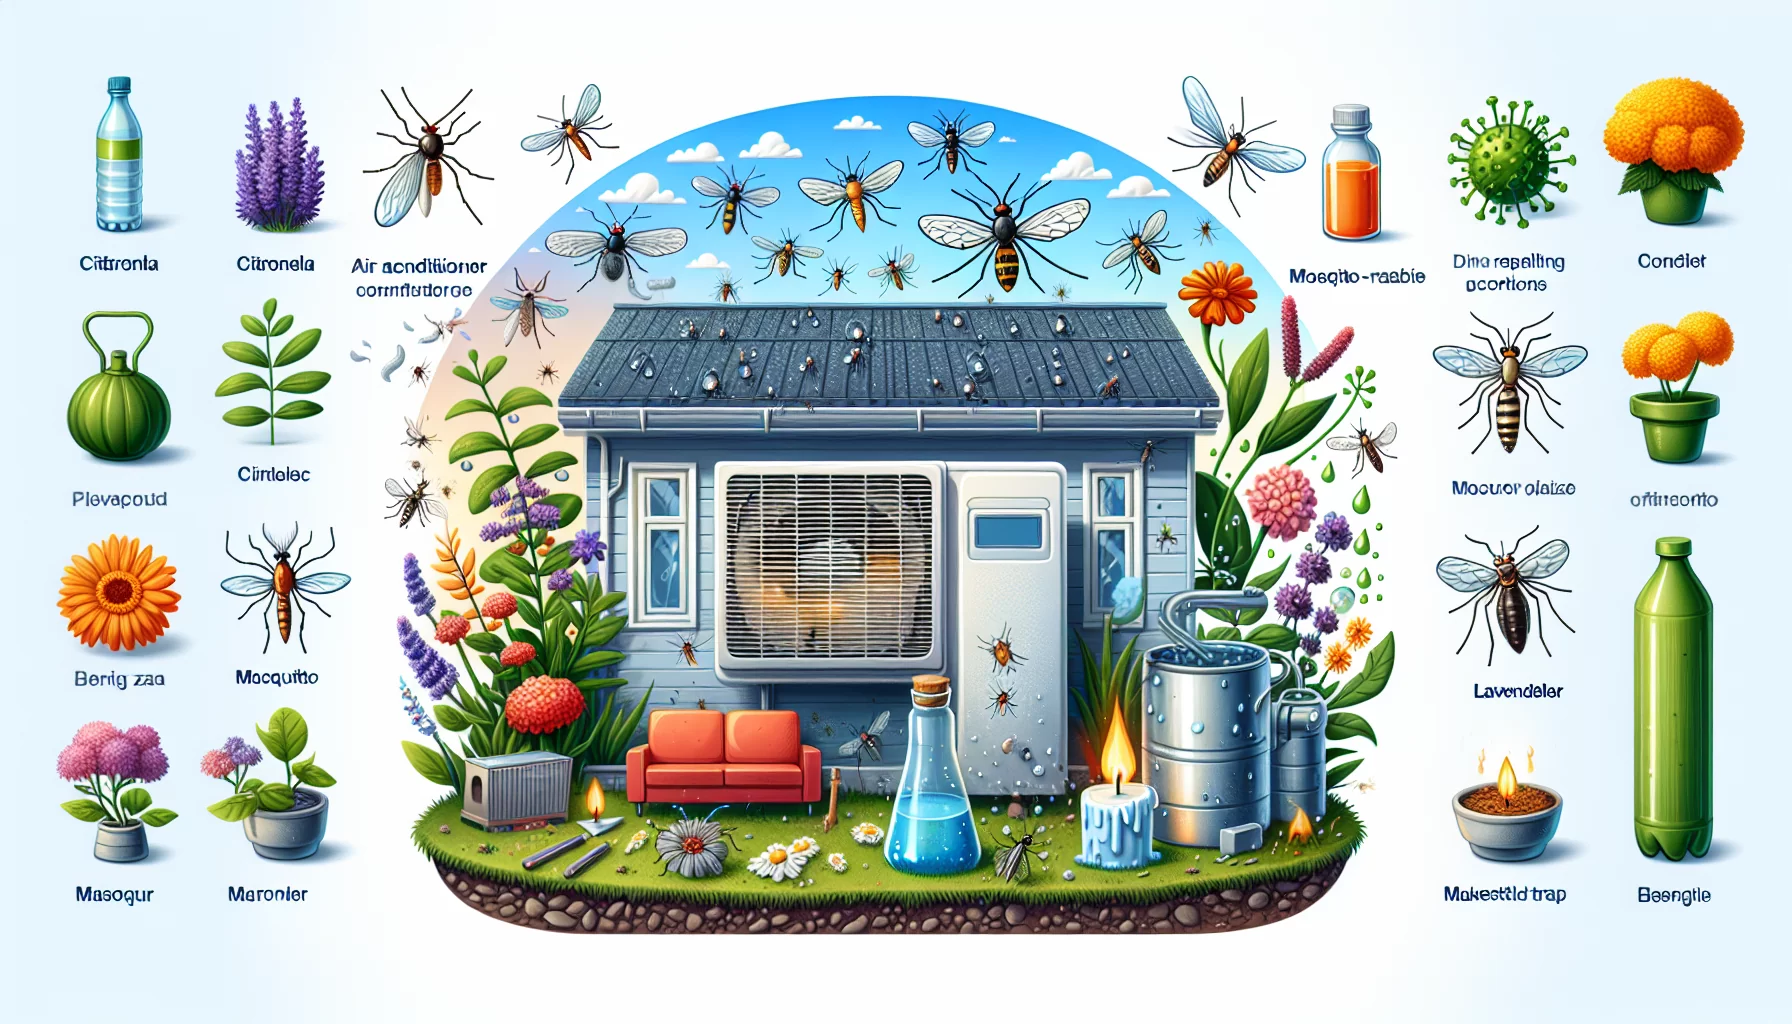 Is your air conditioner attracting mosquitoes? Discover eco-friendly solutions now